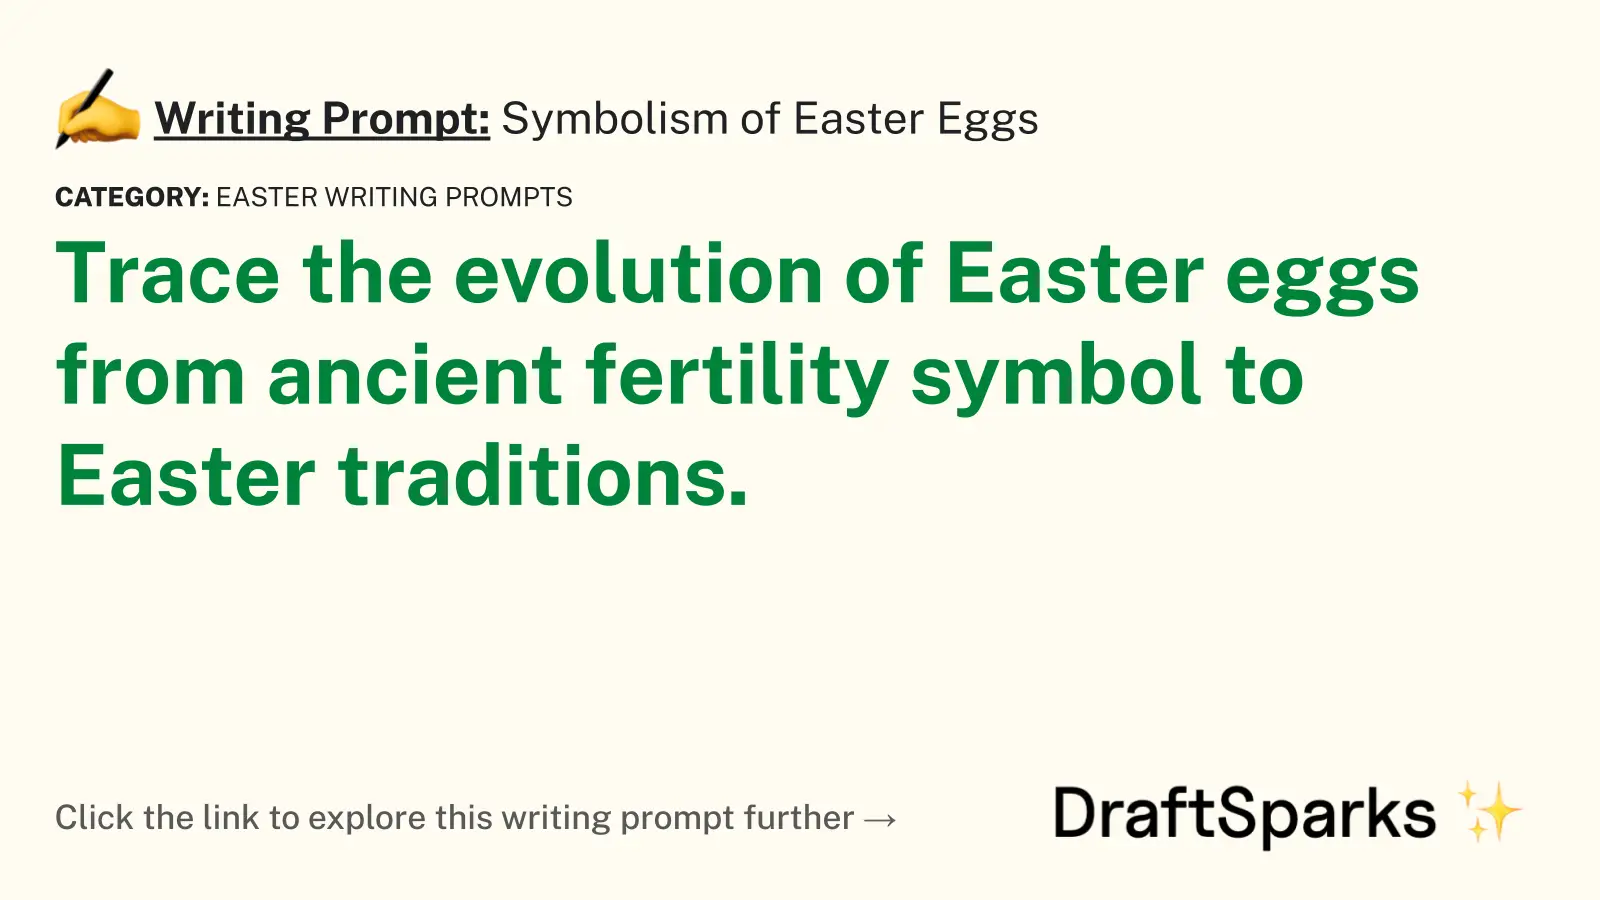 Symbolism of Easter Eggs